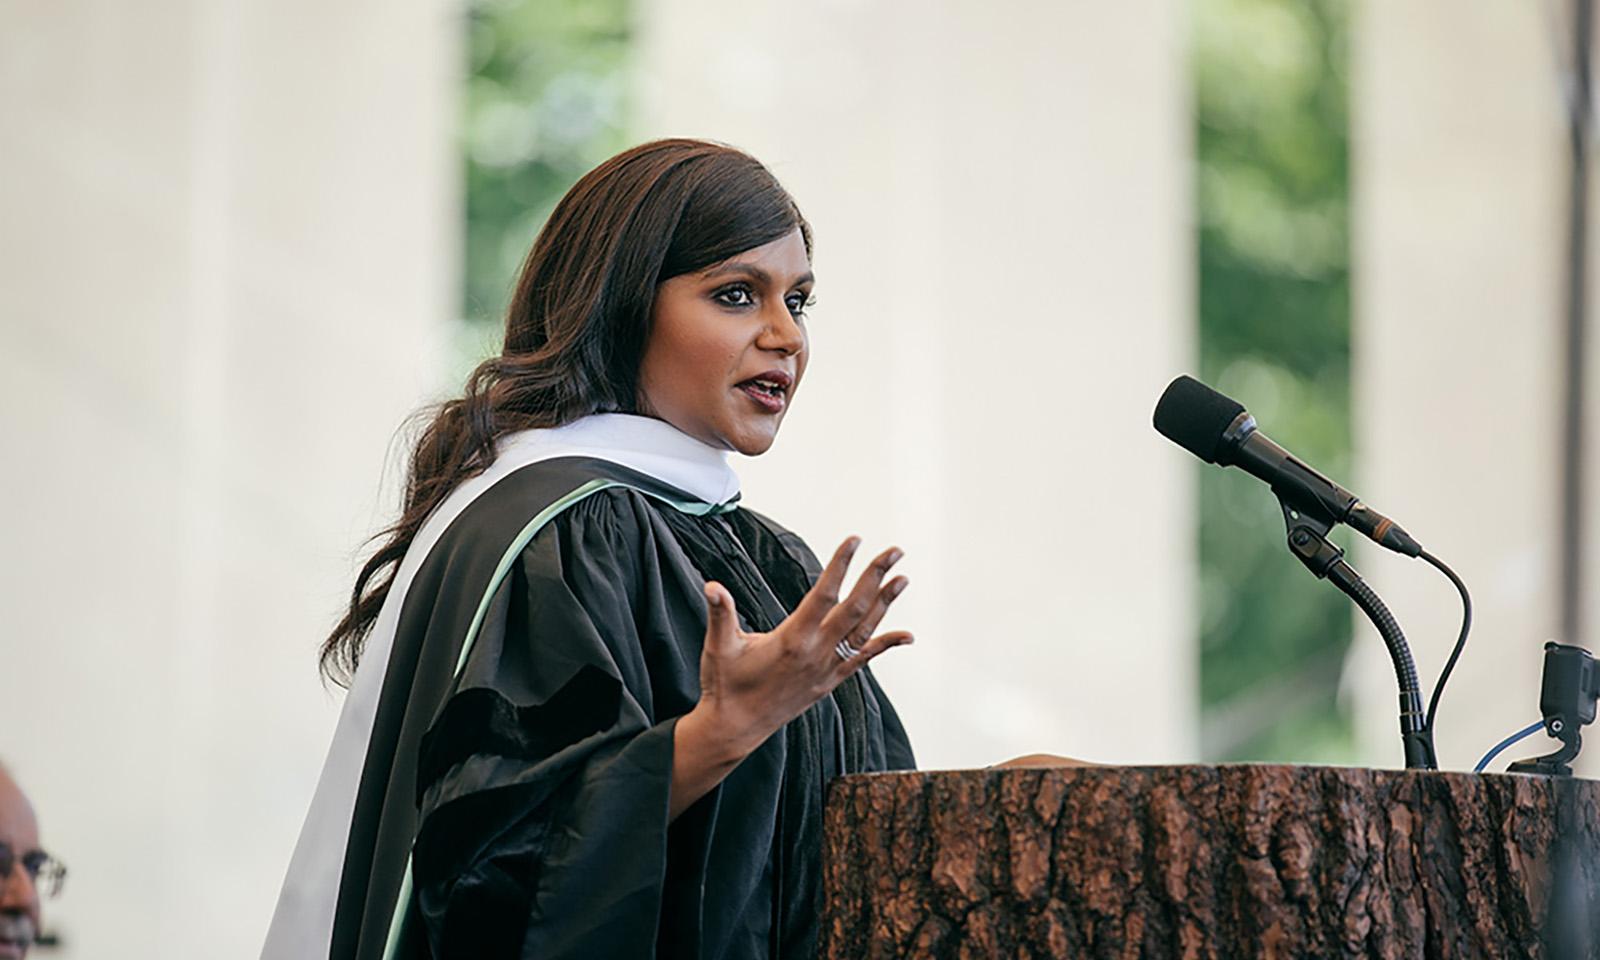 Mindy Kaling at the podium during her commencement speech